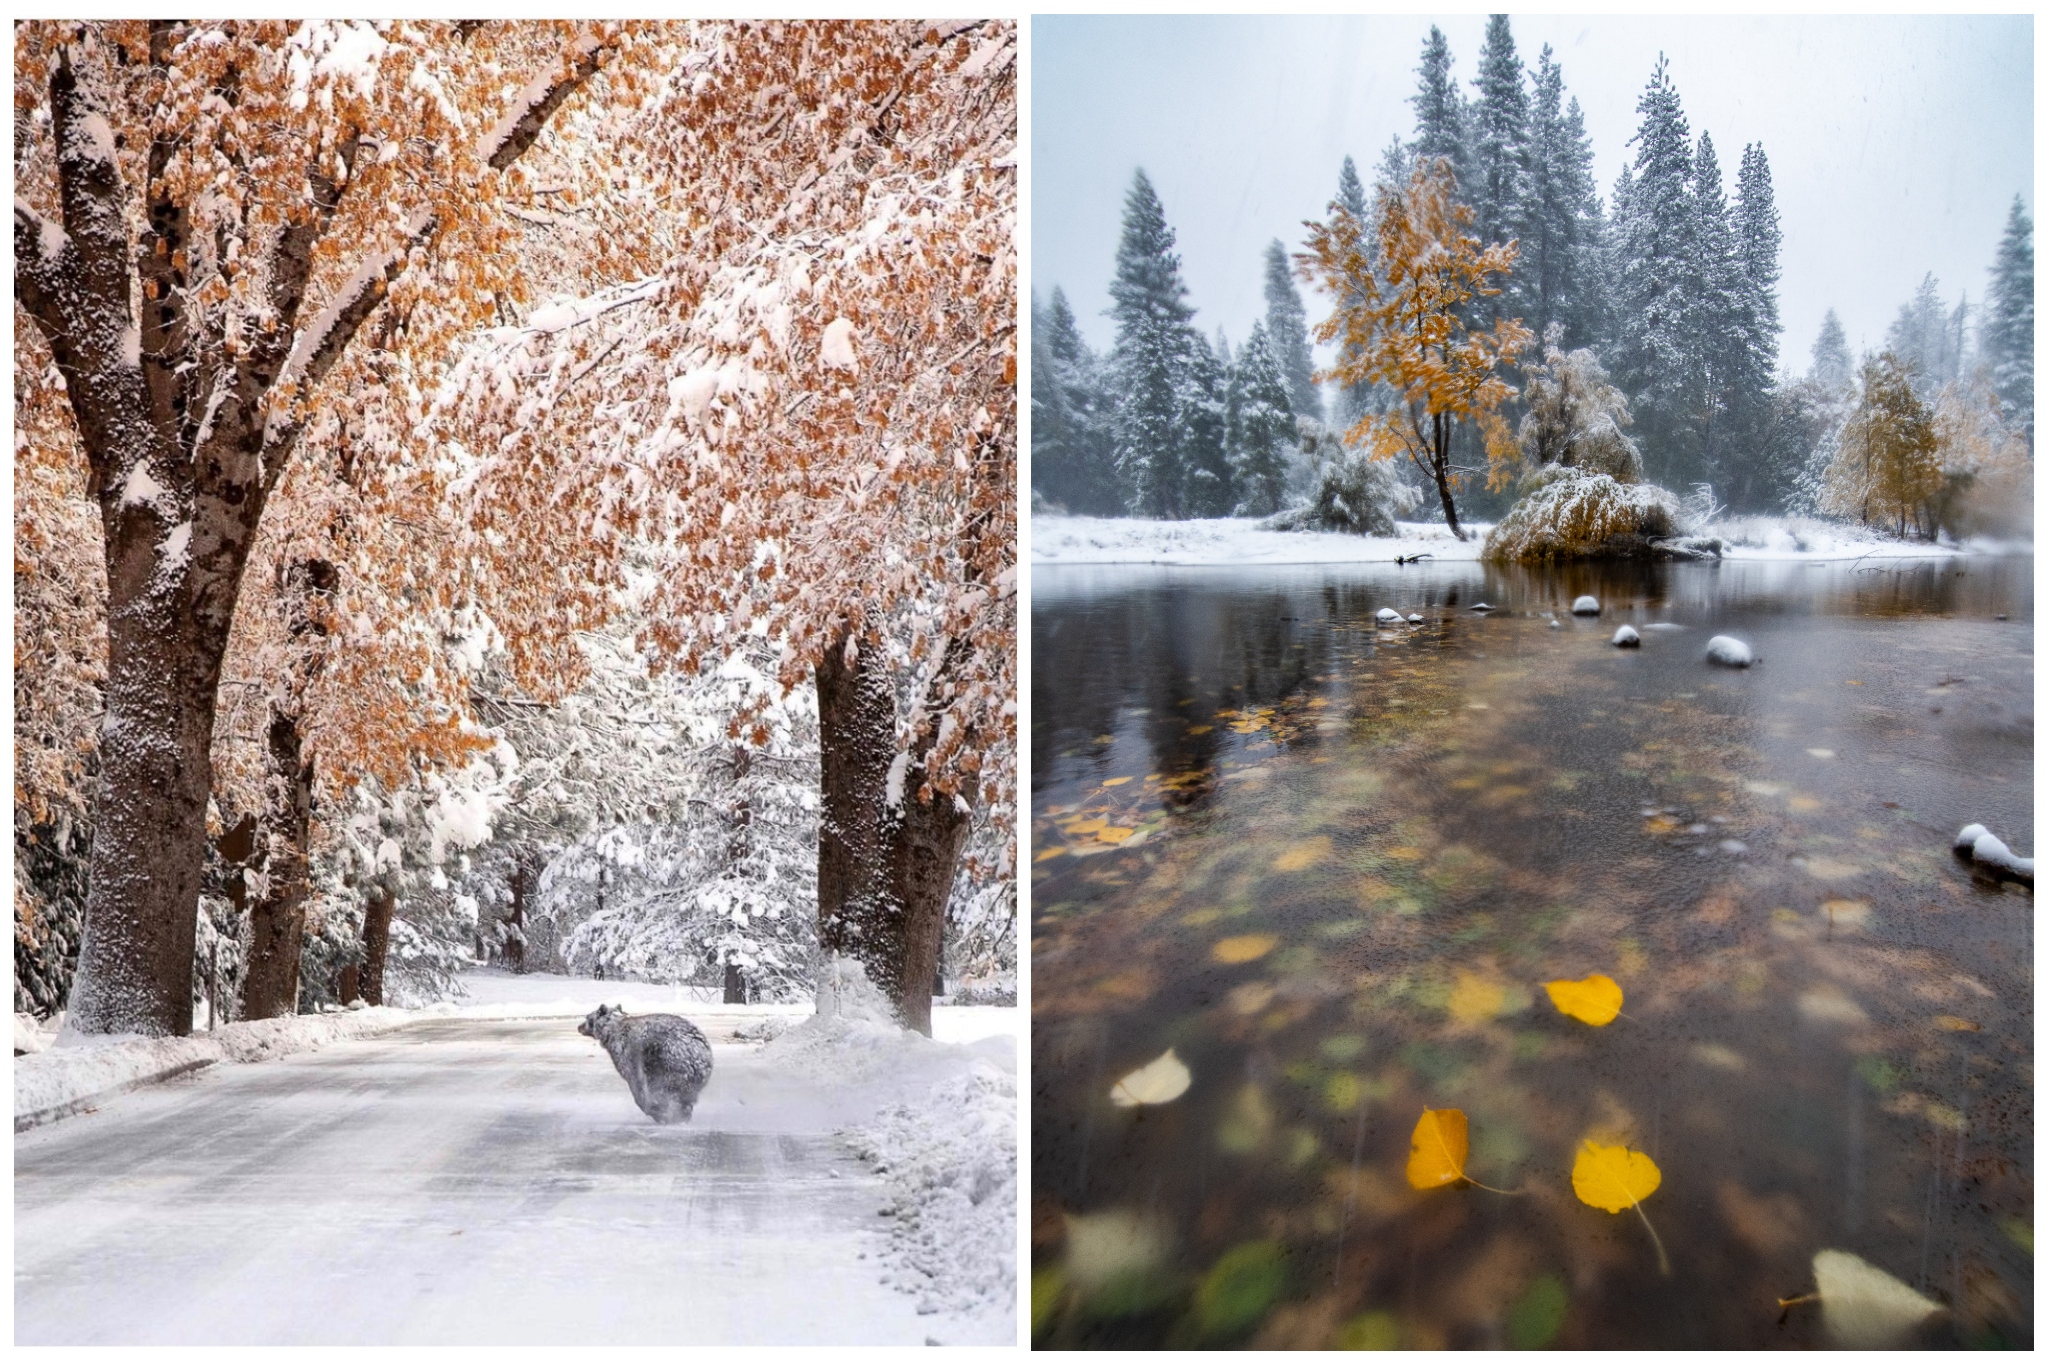 Snowliage' – Photographing The Collision Of Fall & Winter